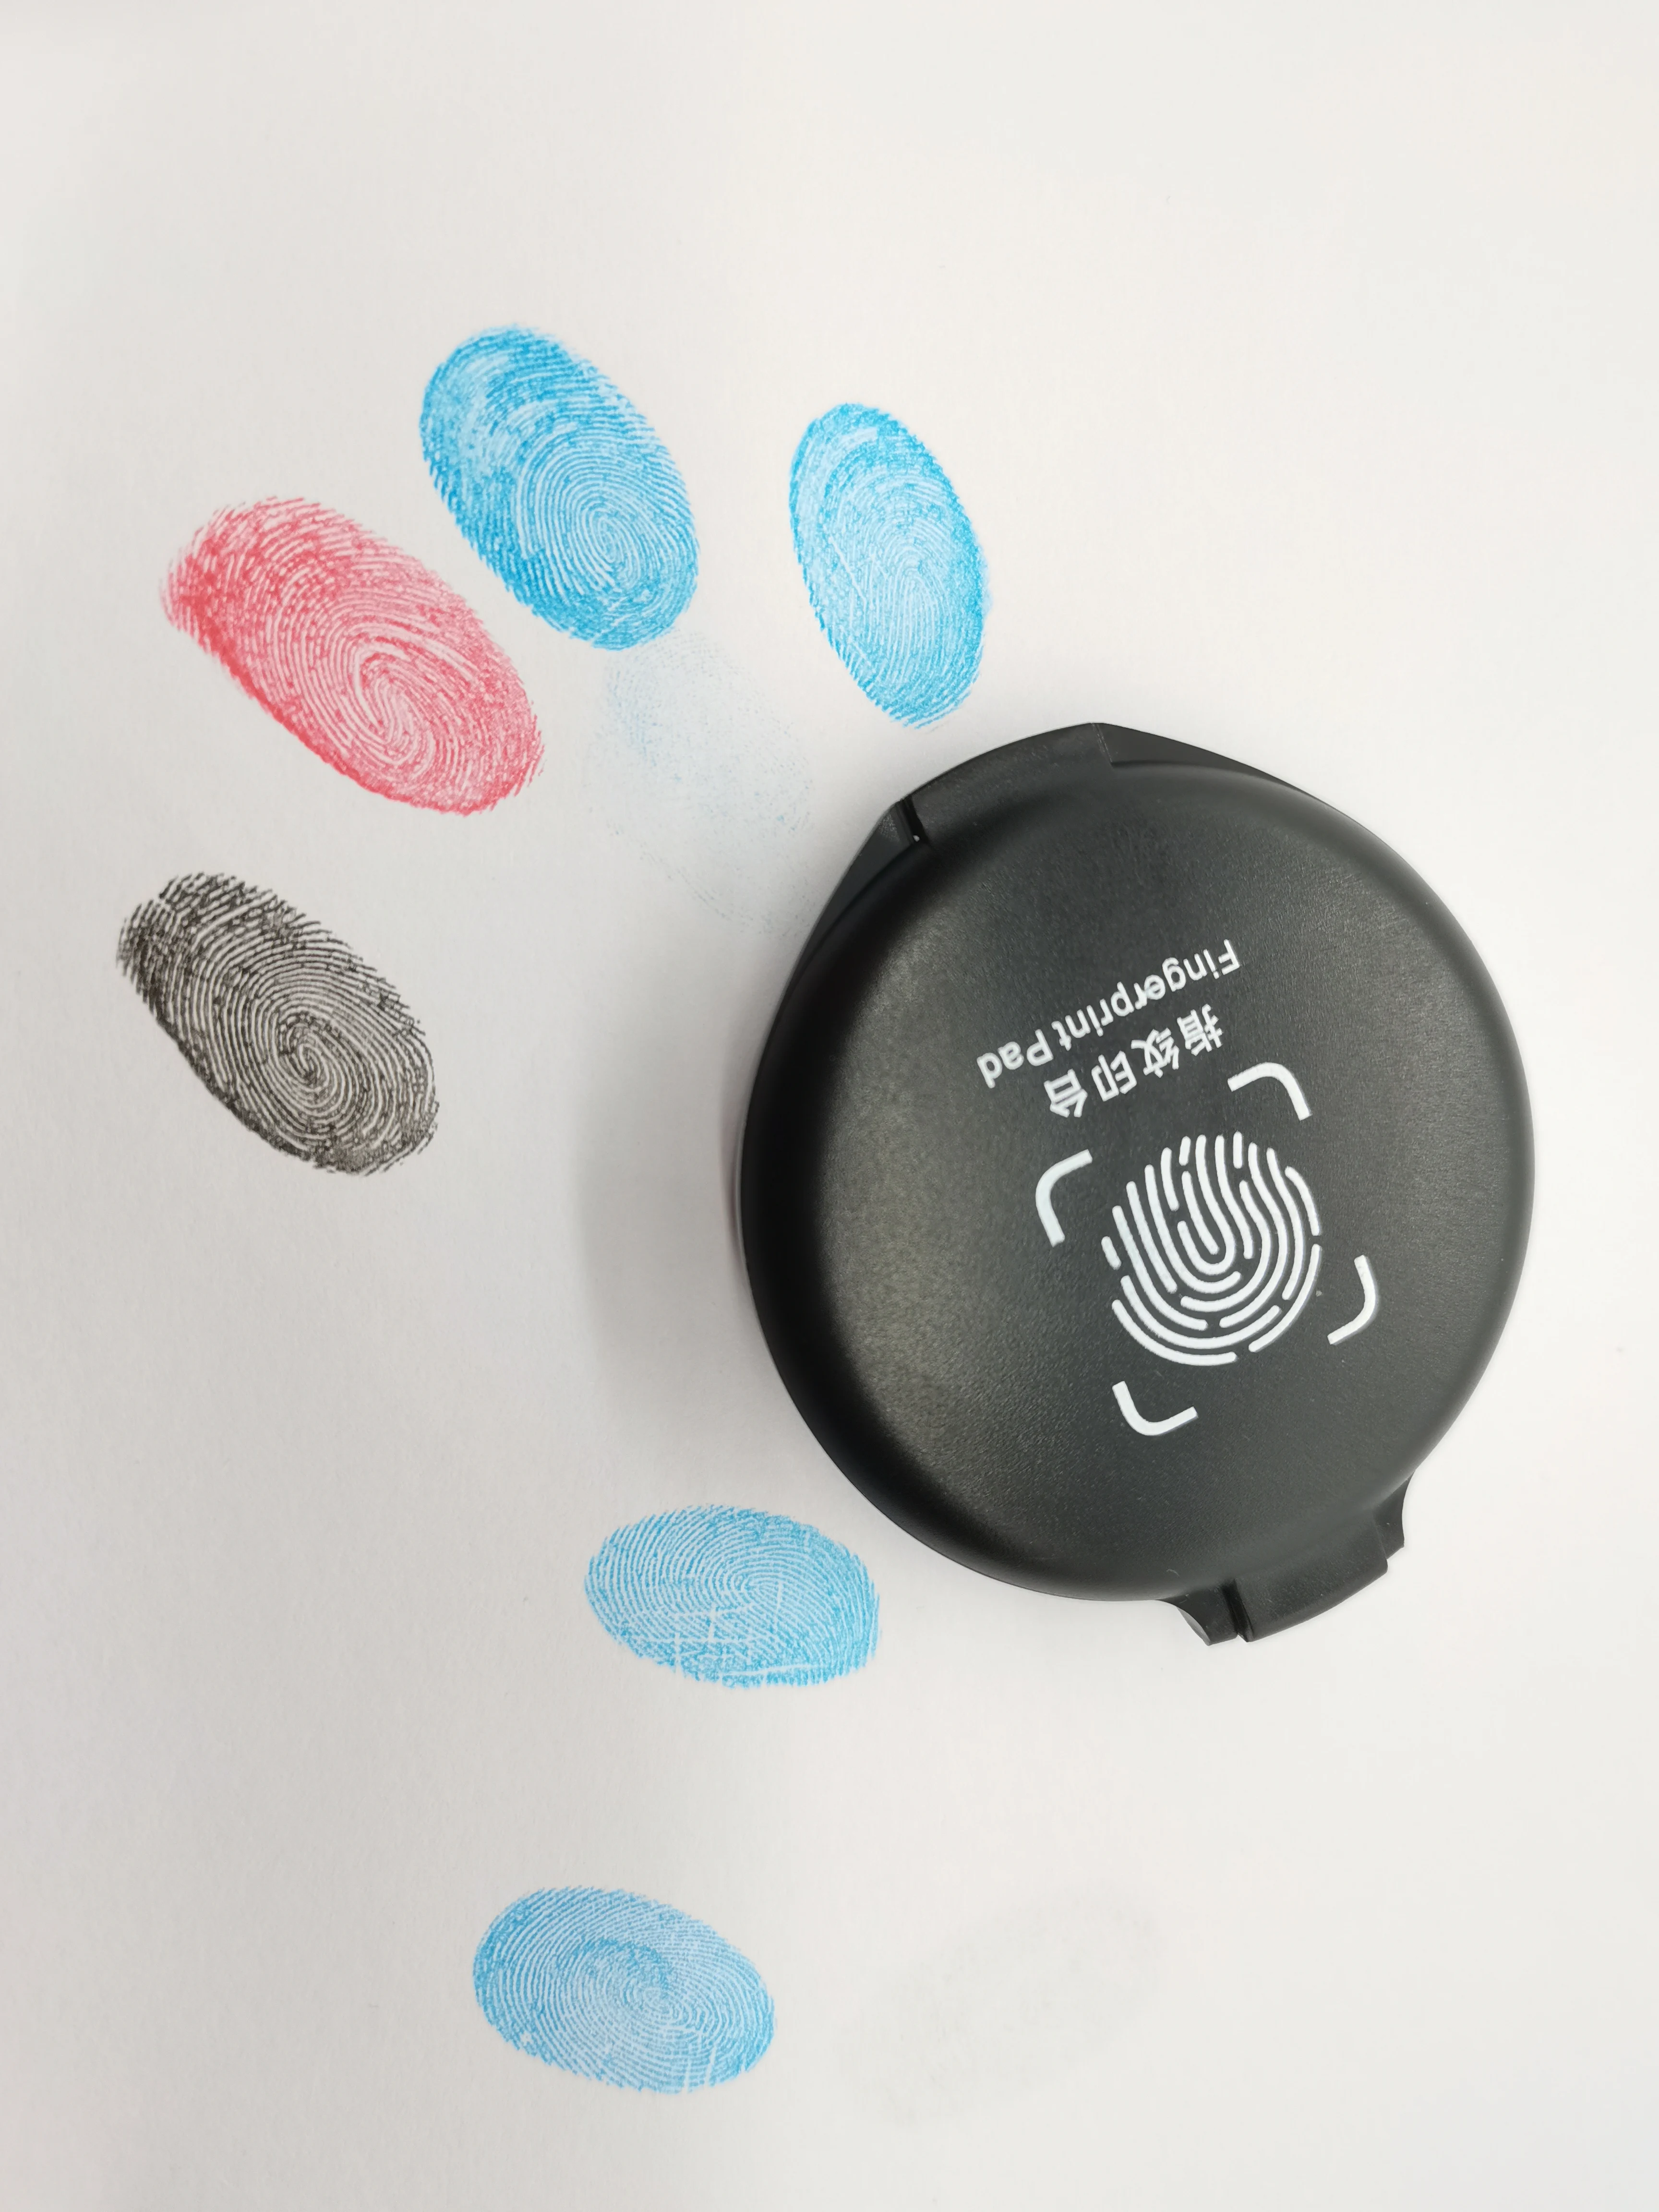 costomied professional inkless fingerprint ink pad